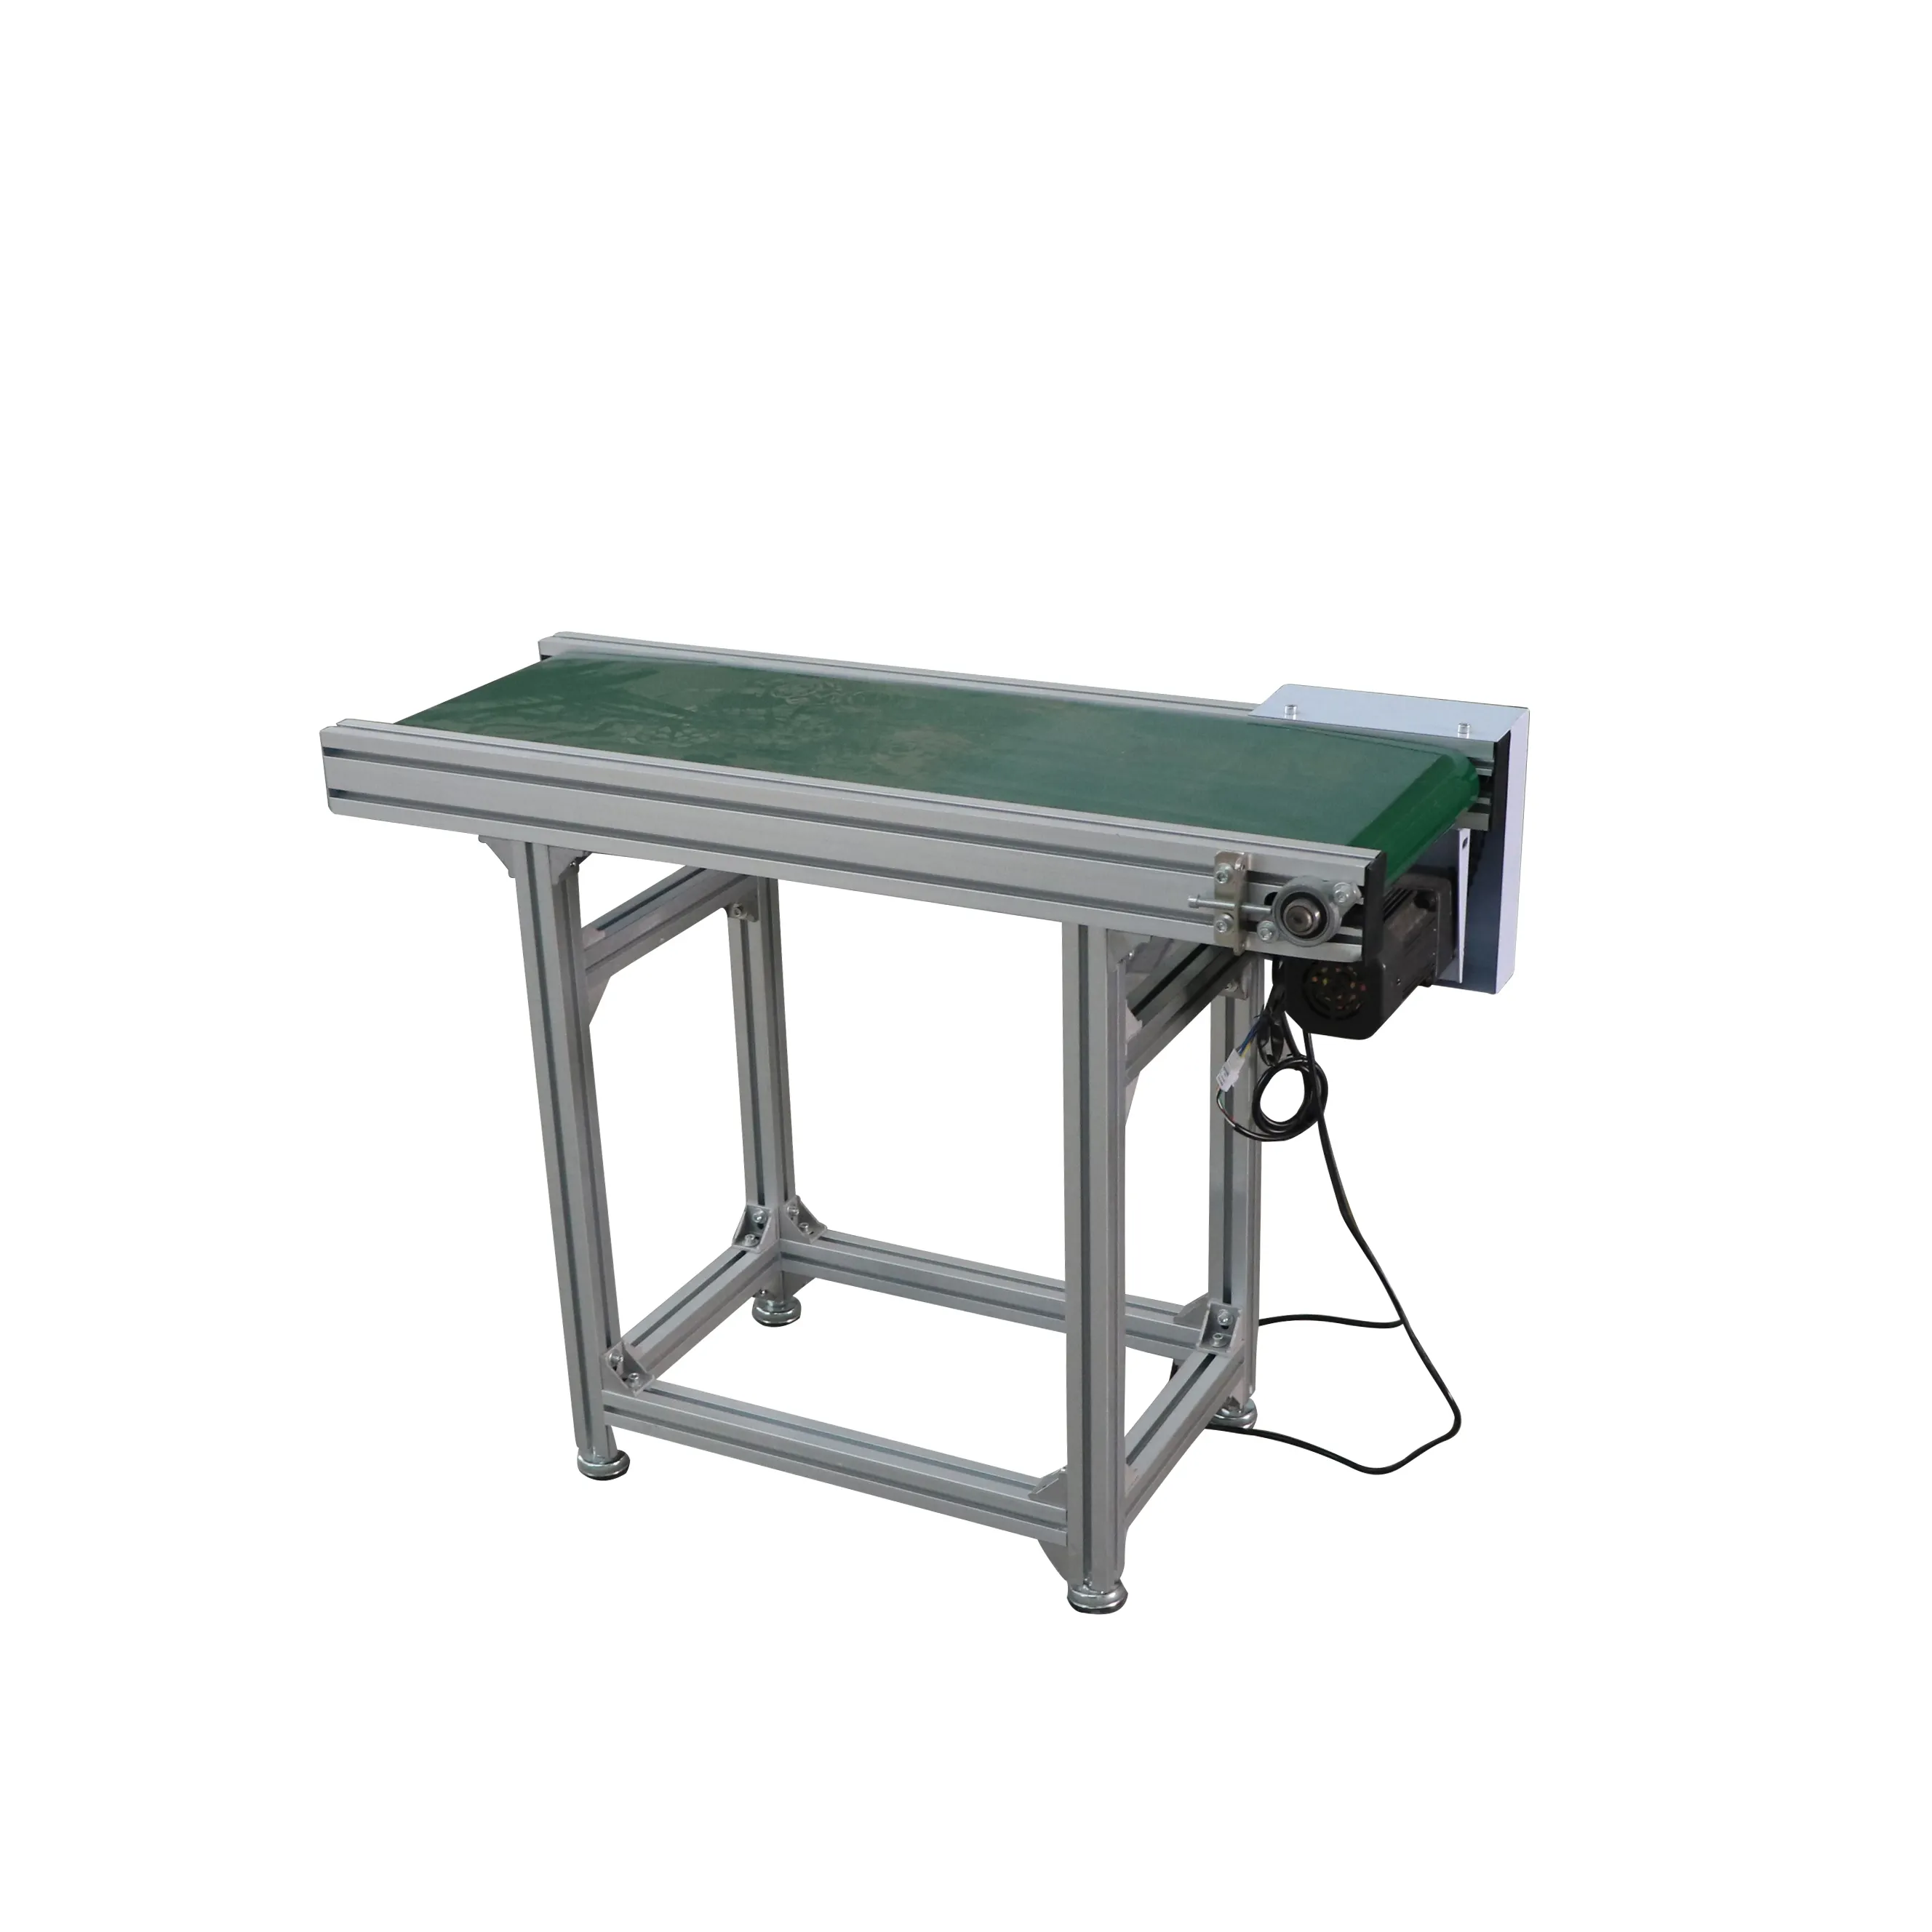 Quality Industrial Assembly Work Tables Stable China Conveyor Belt For Producing Line